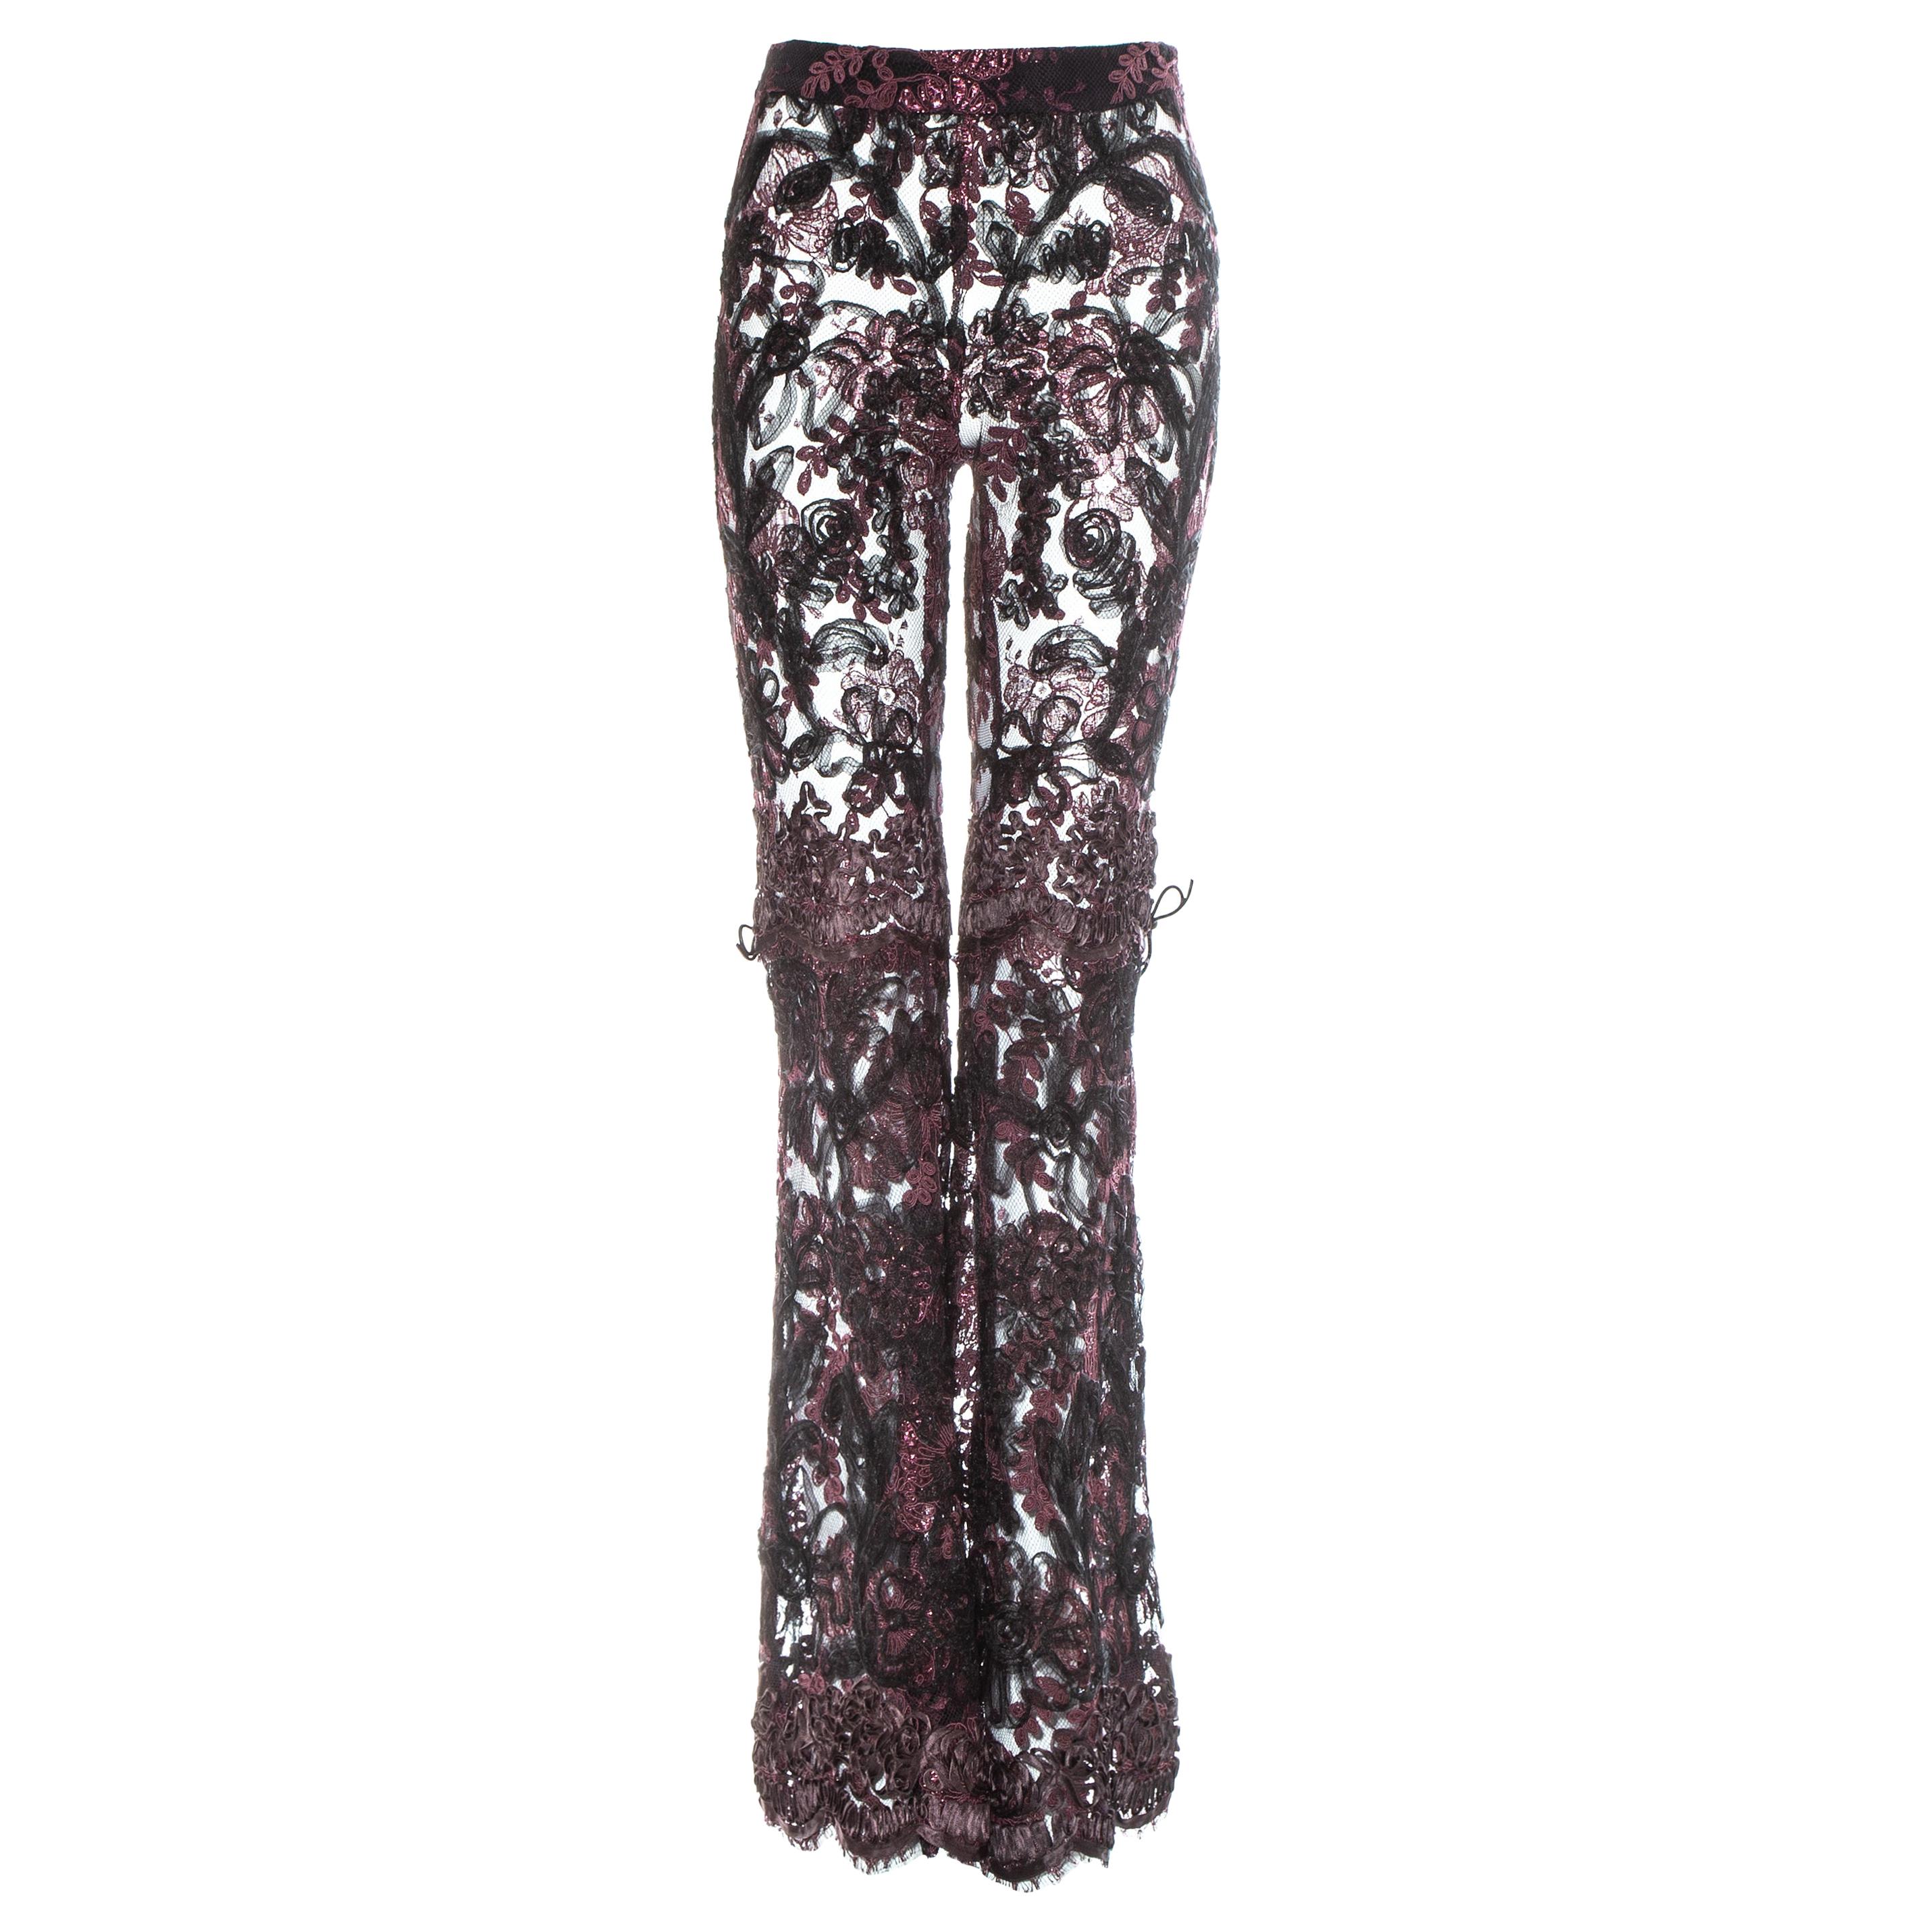 Gucci by Tom Ford purple embroidered lace flared evening pants, fw 1999